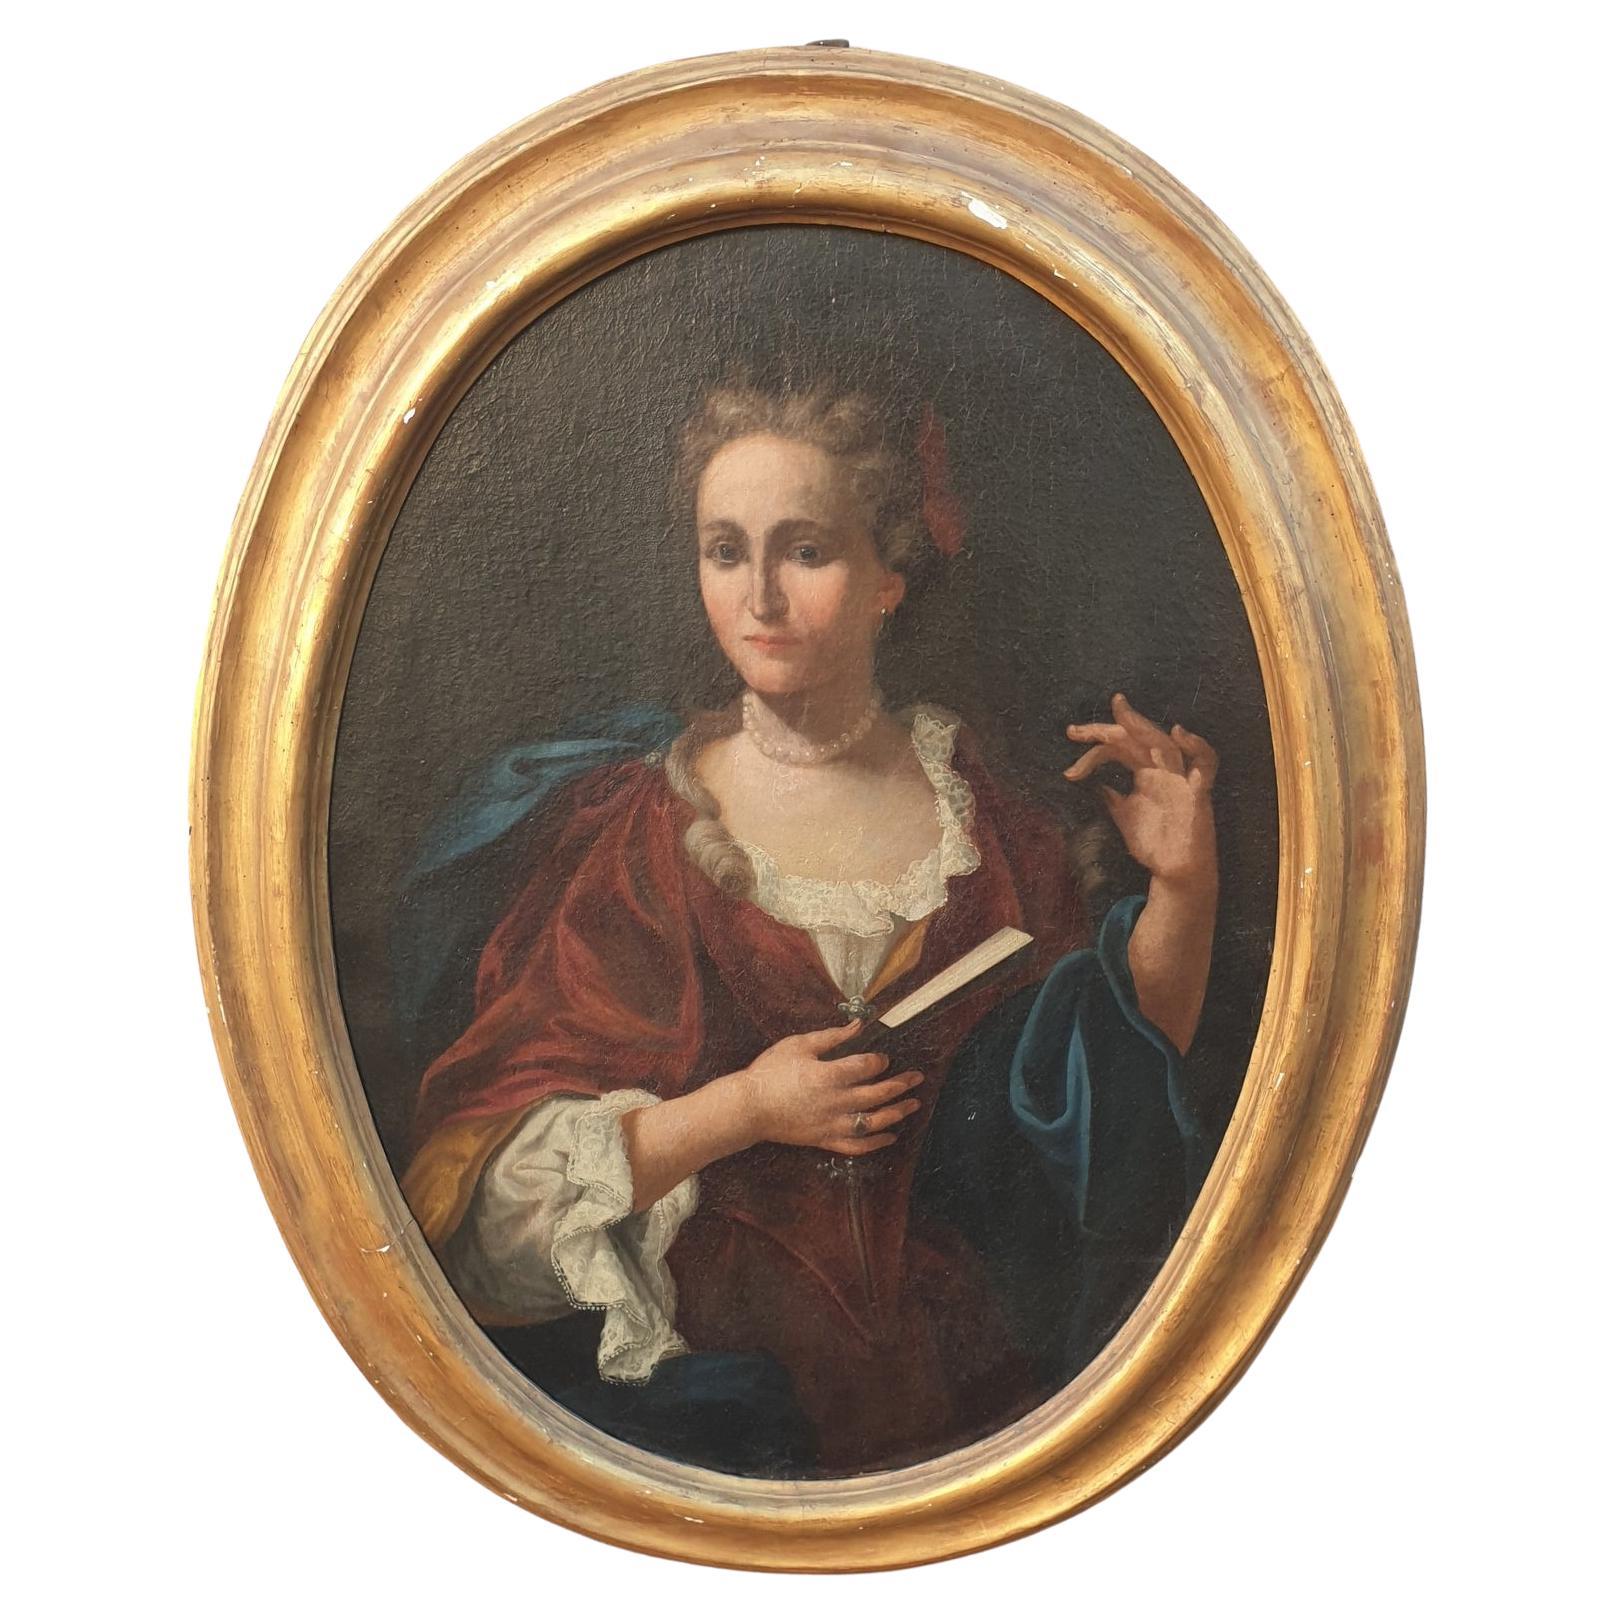 Portrait of Lady with a Fan, Framed Oval, 18th Century